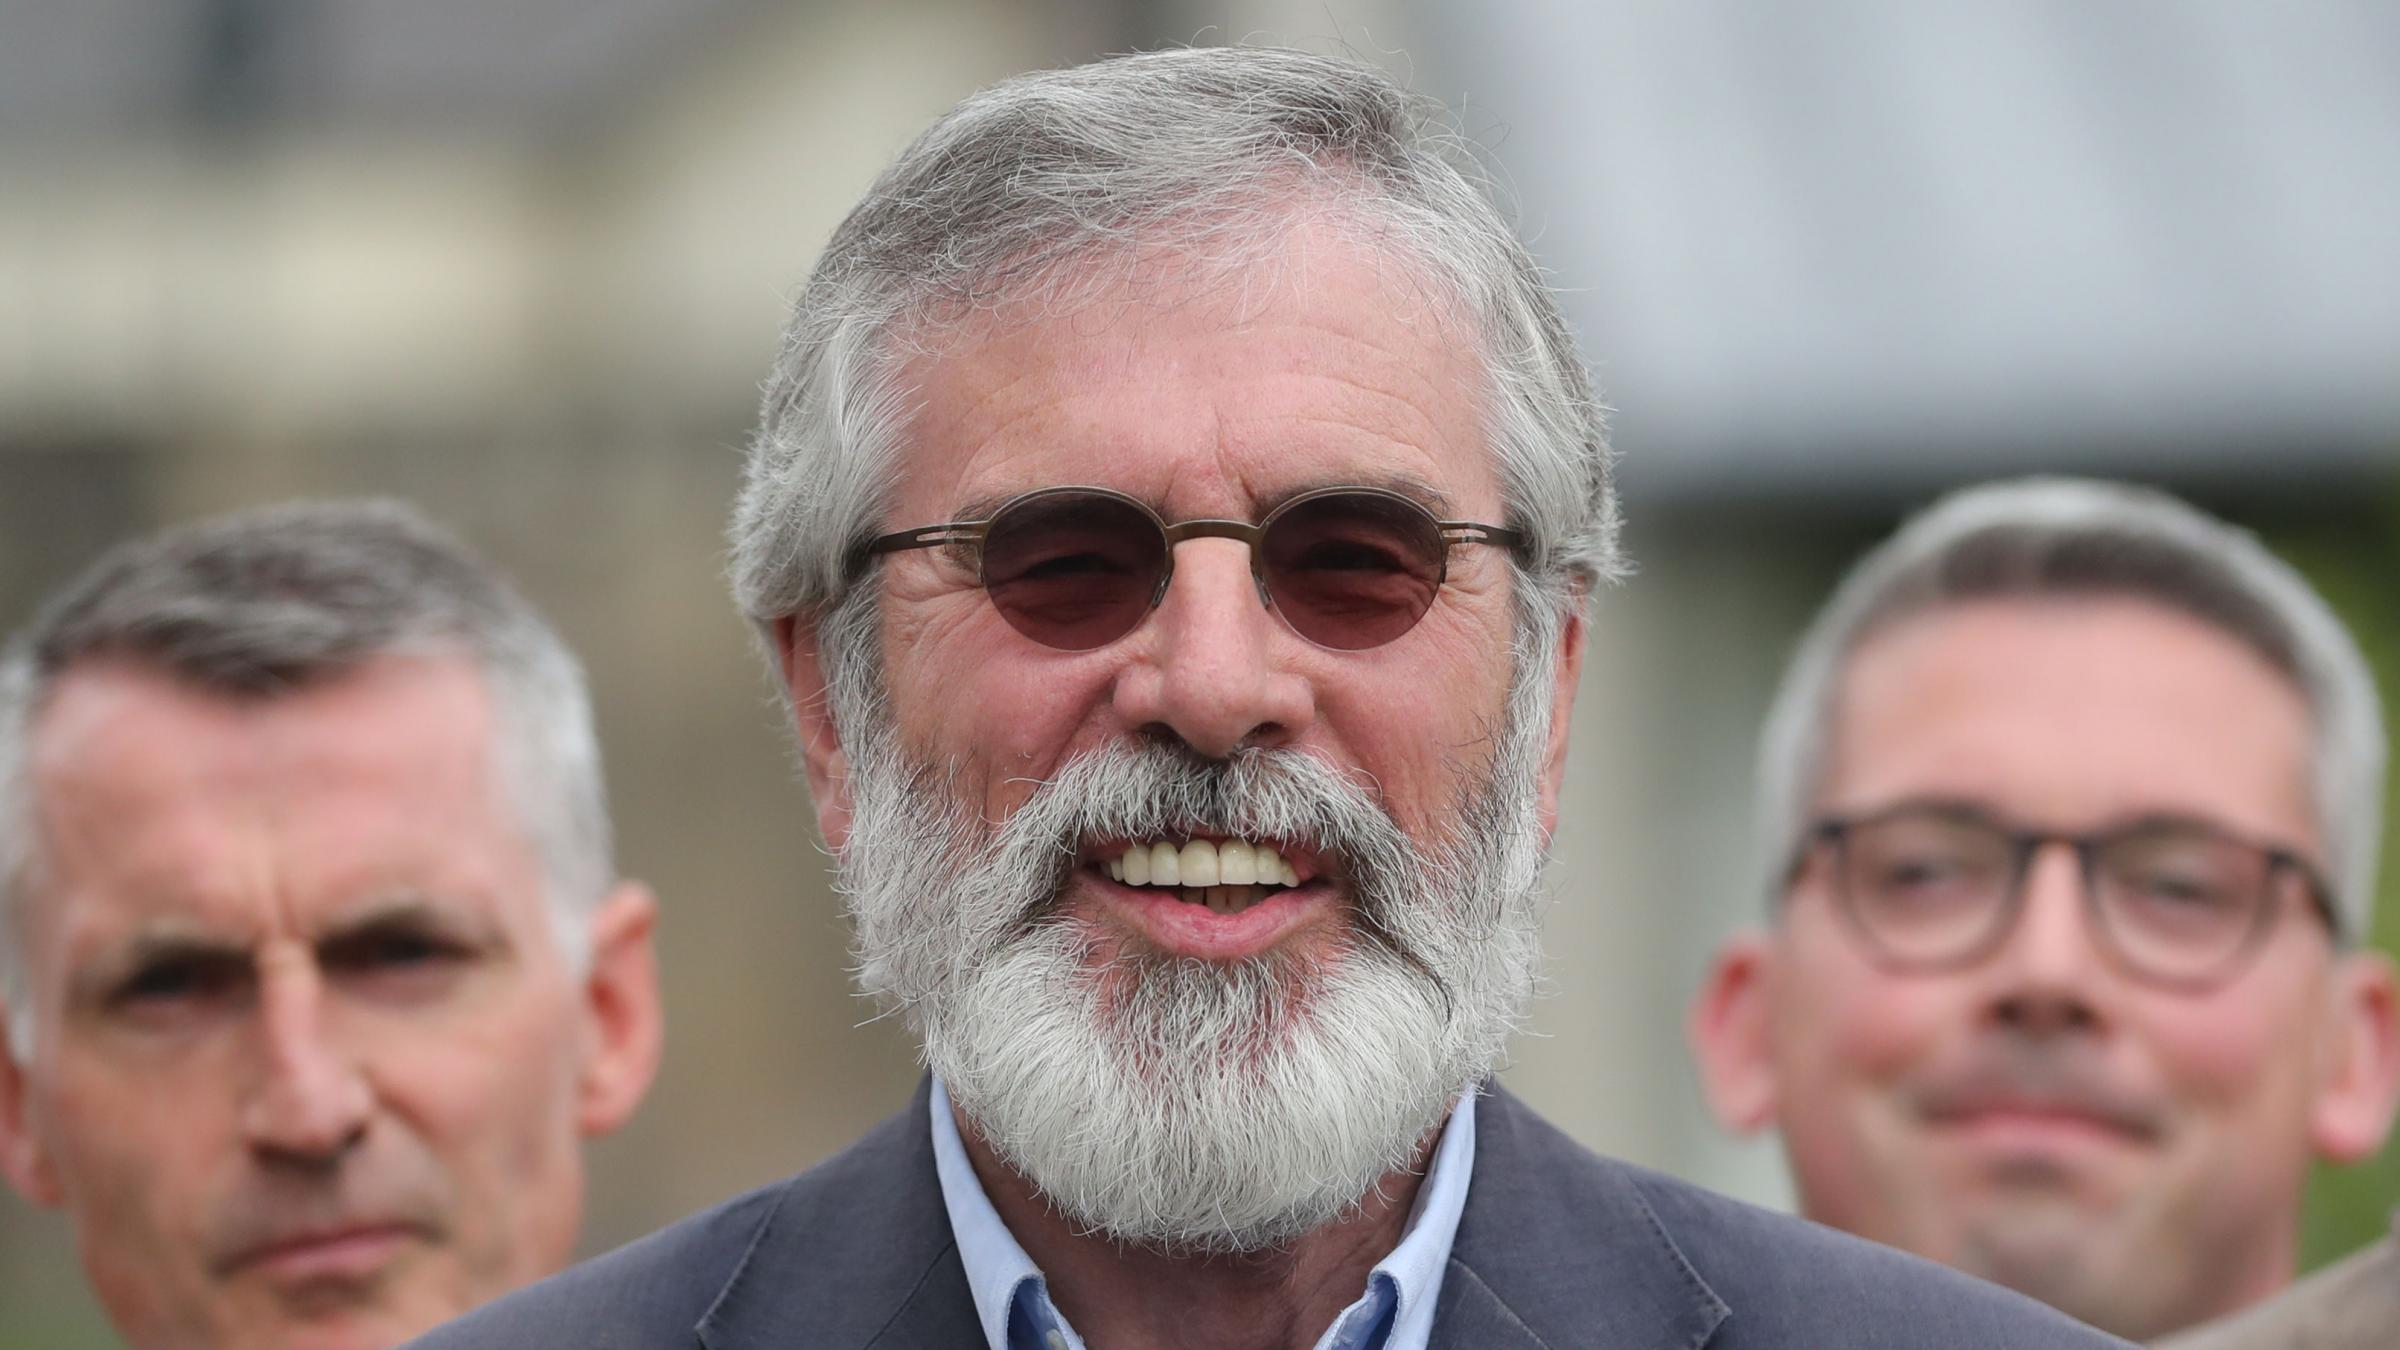 Powersharing will ensure DUP deal cash is shared fairly: Gerry Adams - Richmond and Twickenham Times